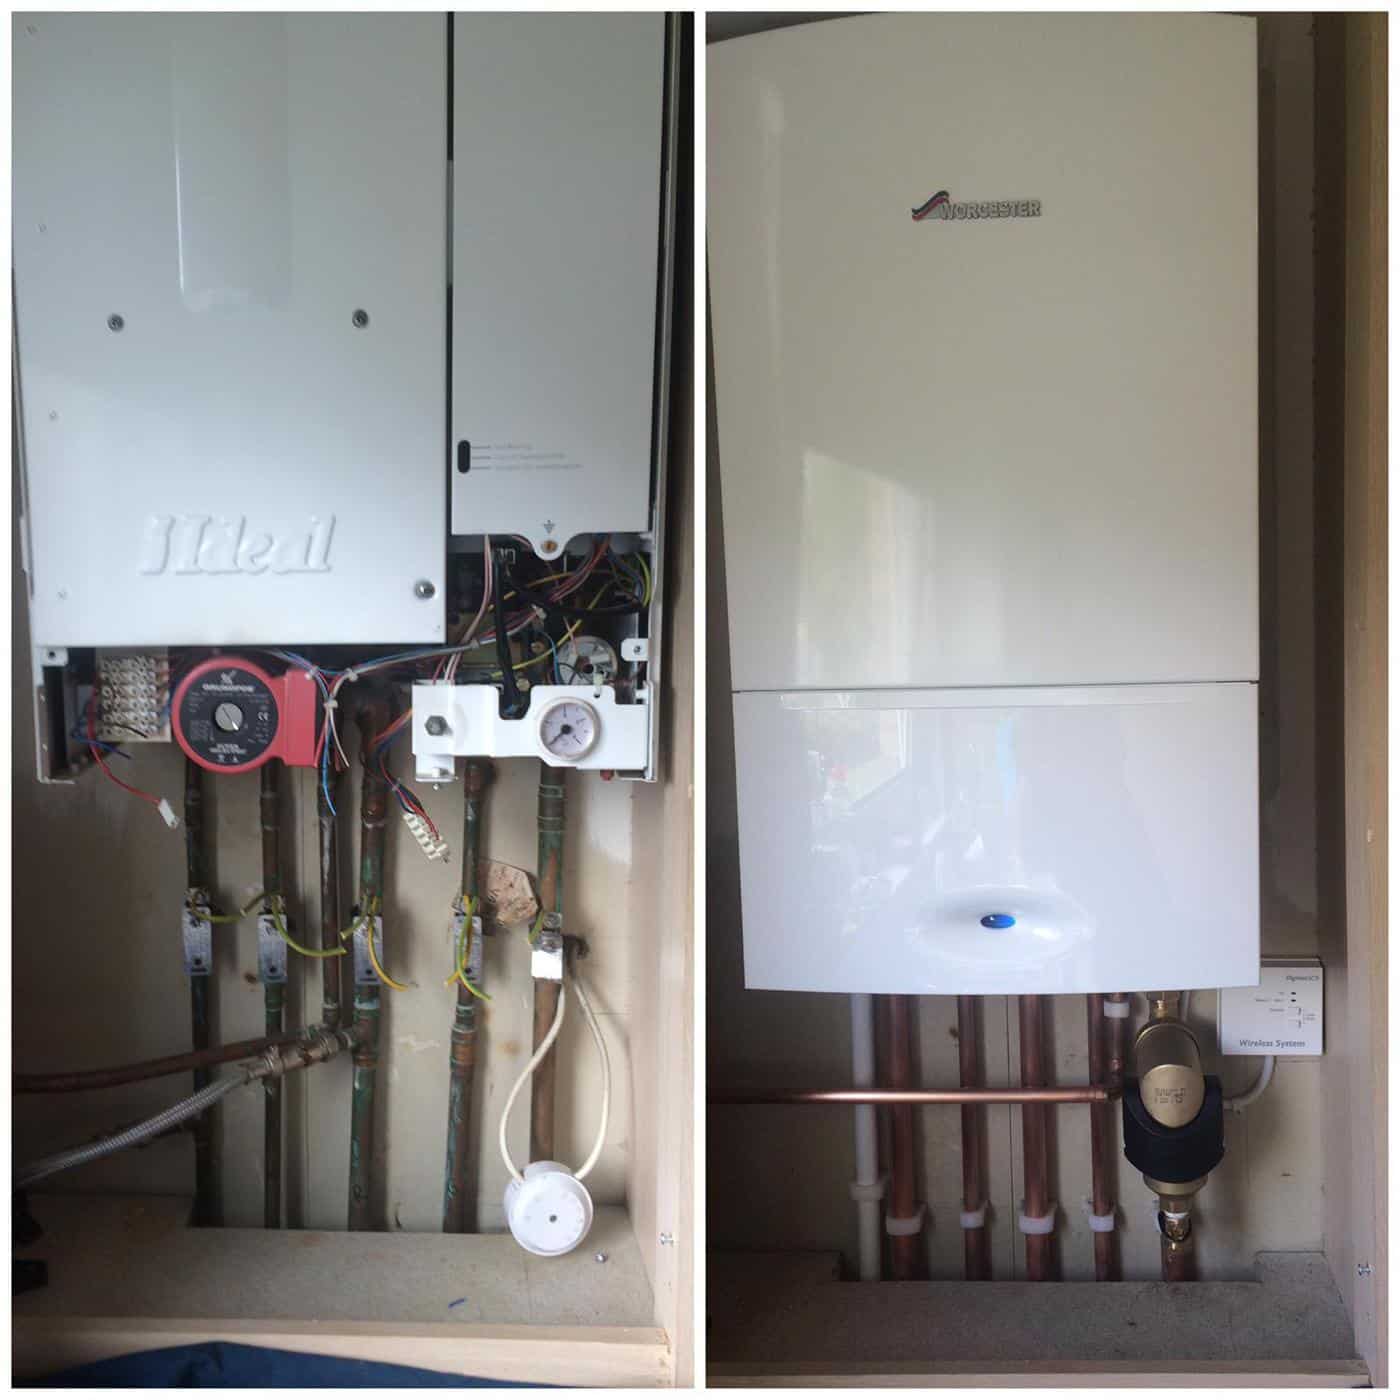 LCD Heating & Gas Services Clydebank Gallery 34